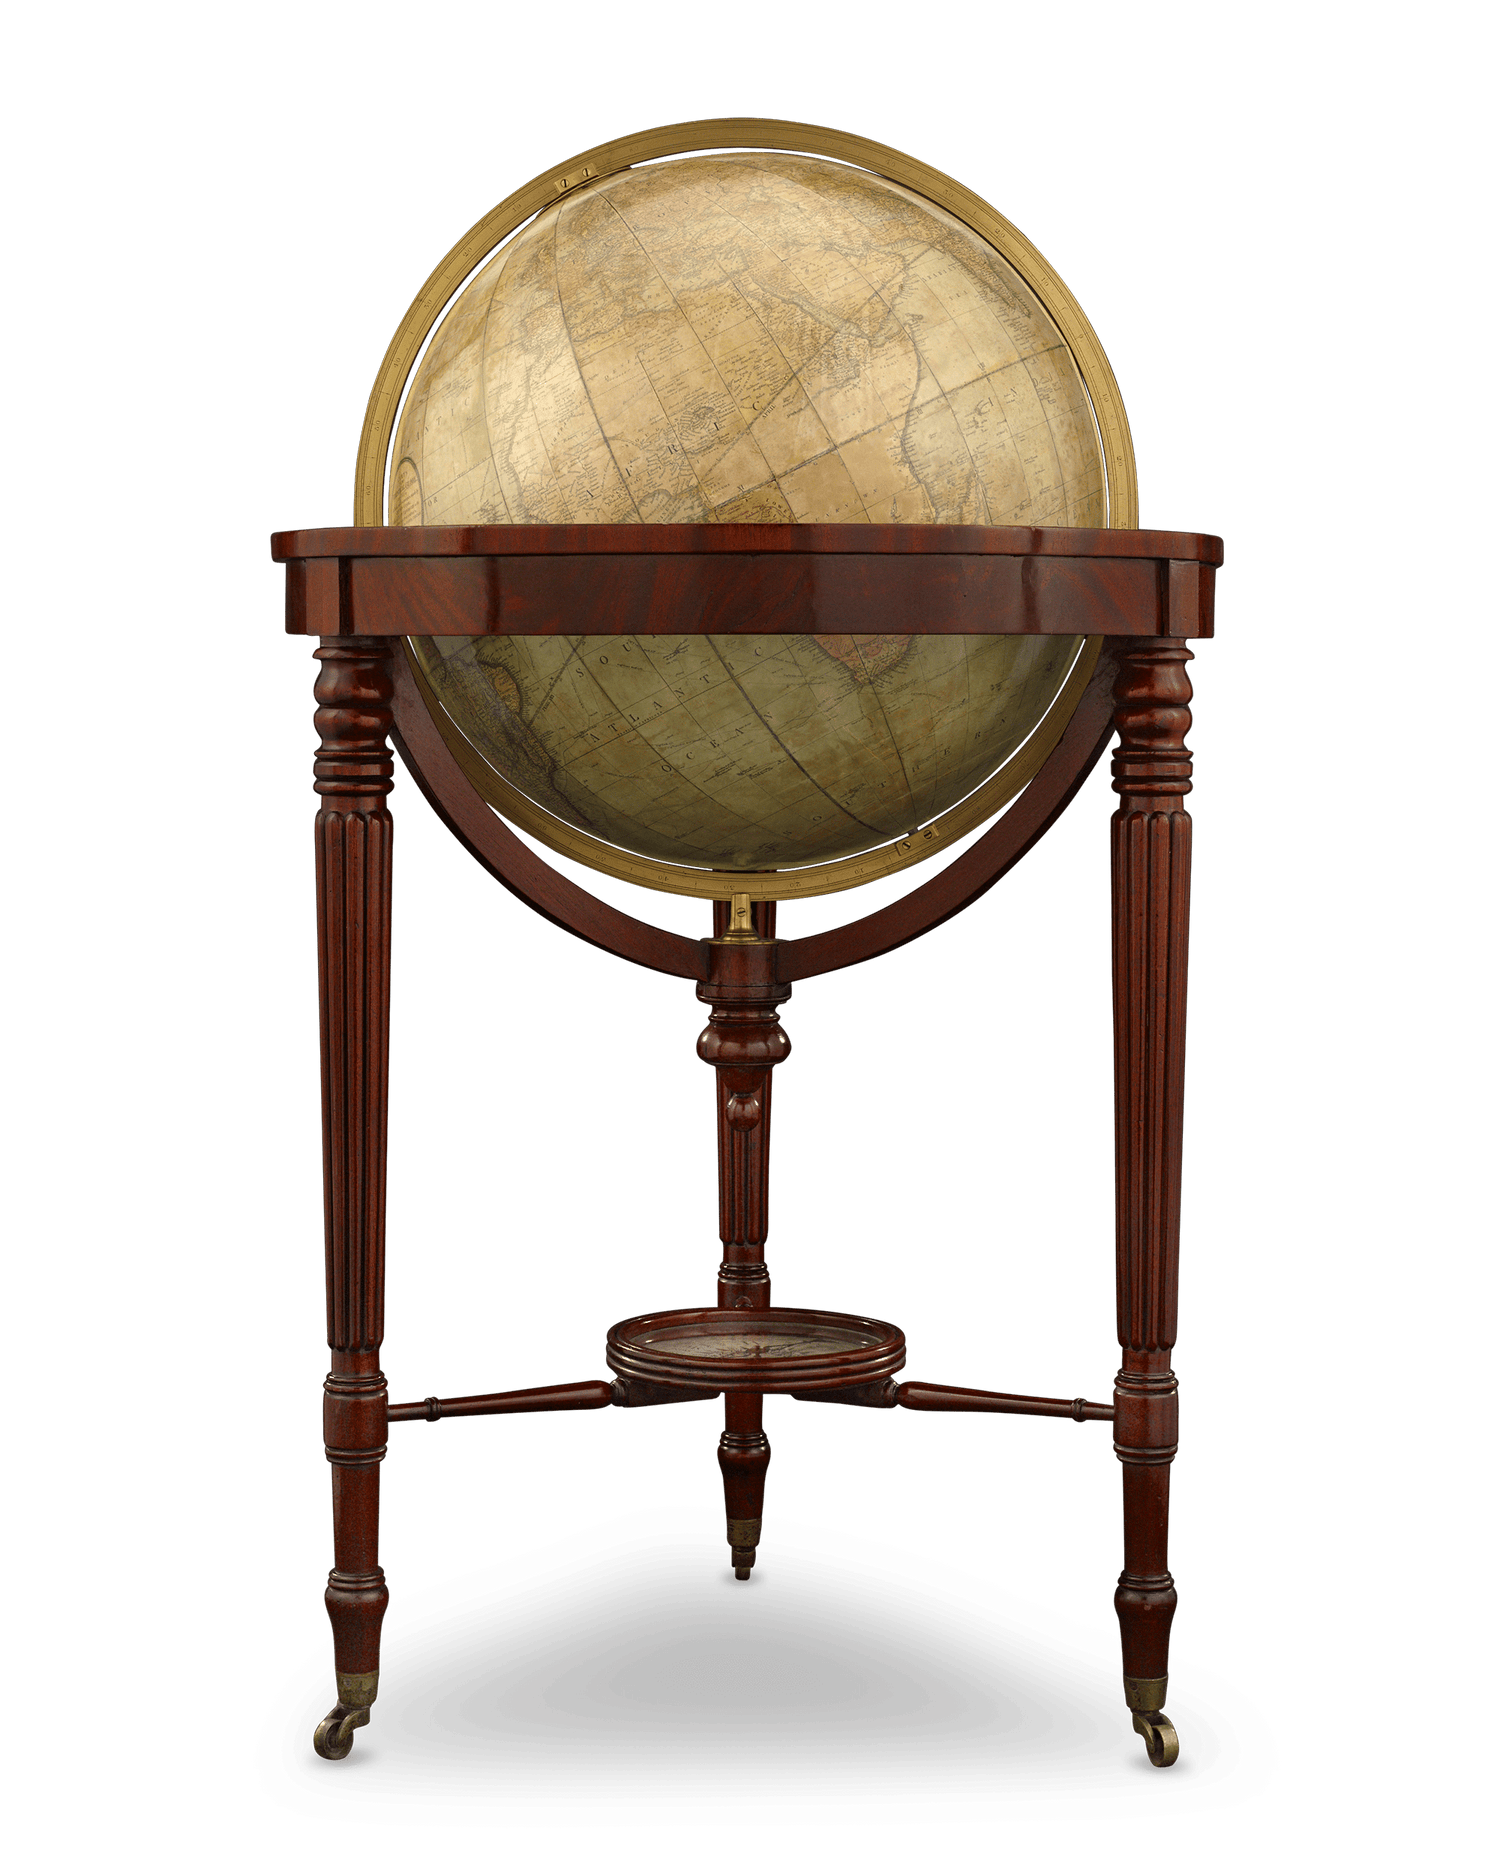 William IV 21-Inch Terrestrial and Celestial Floor Globes by J. W. Cary